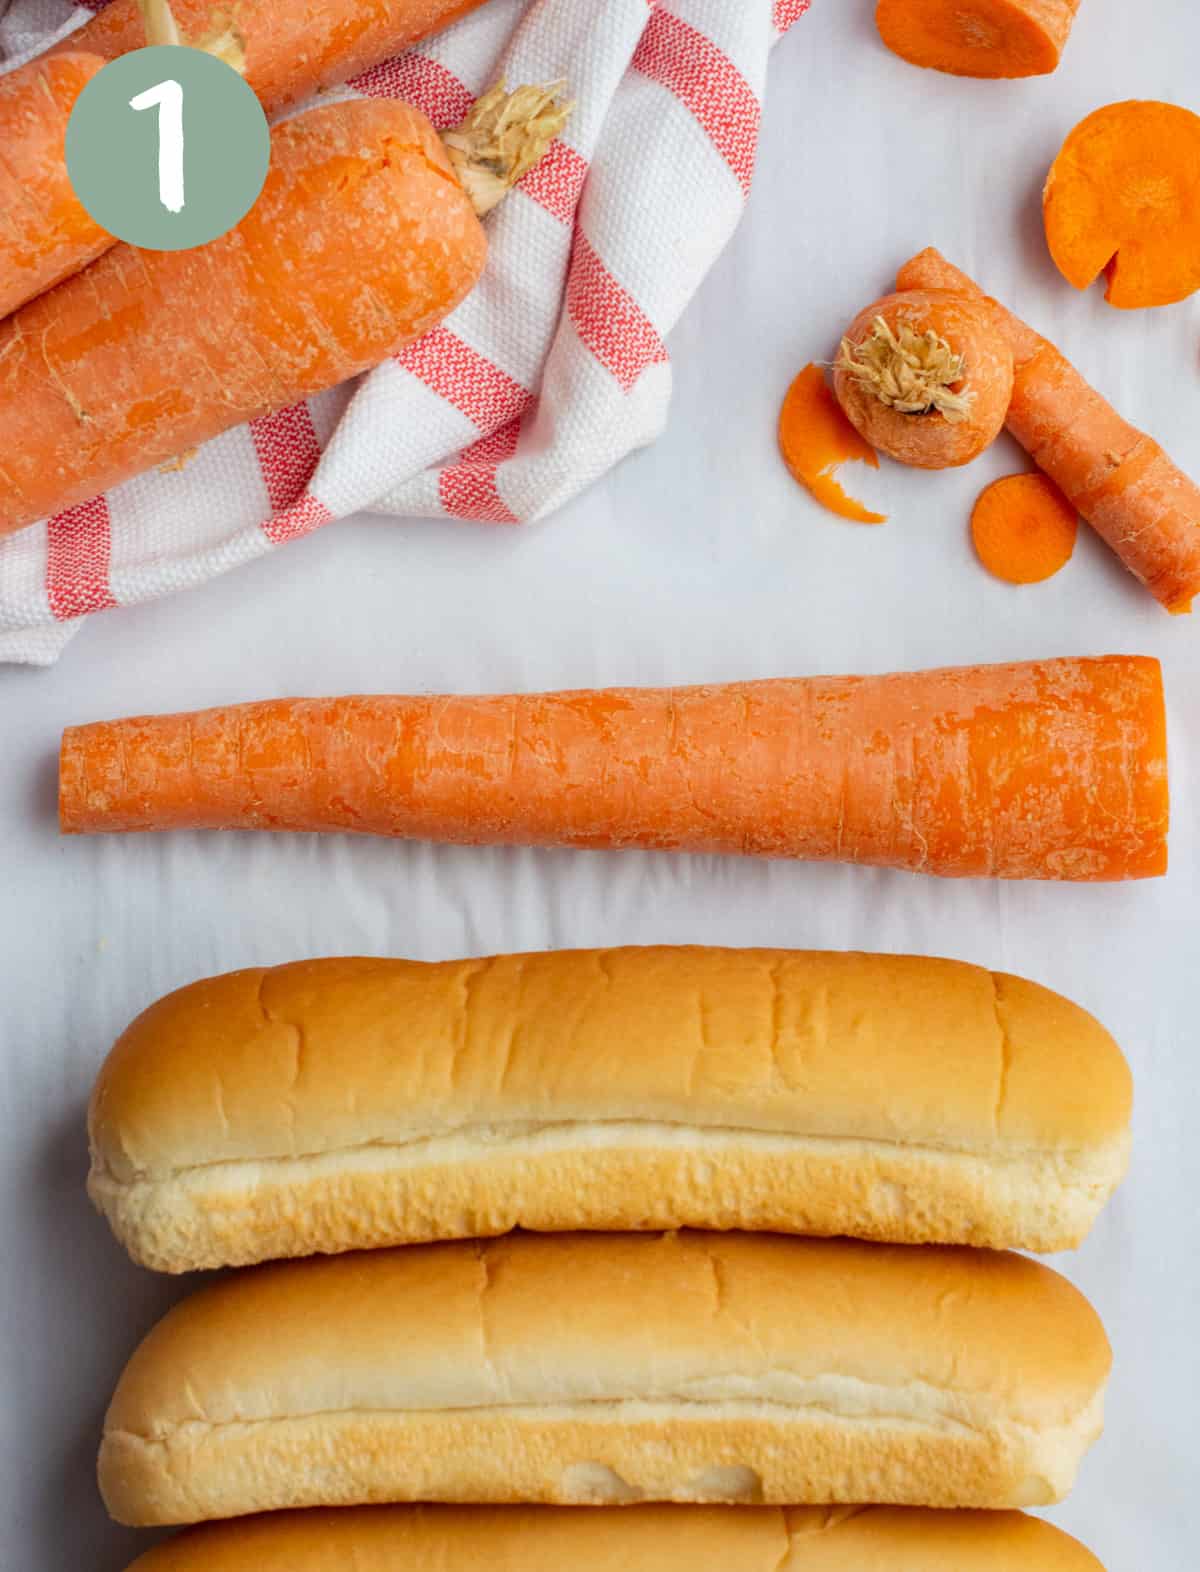 A carrot with both ends cut off next to a hot dog bun showing the length to cut the carrot.